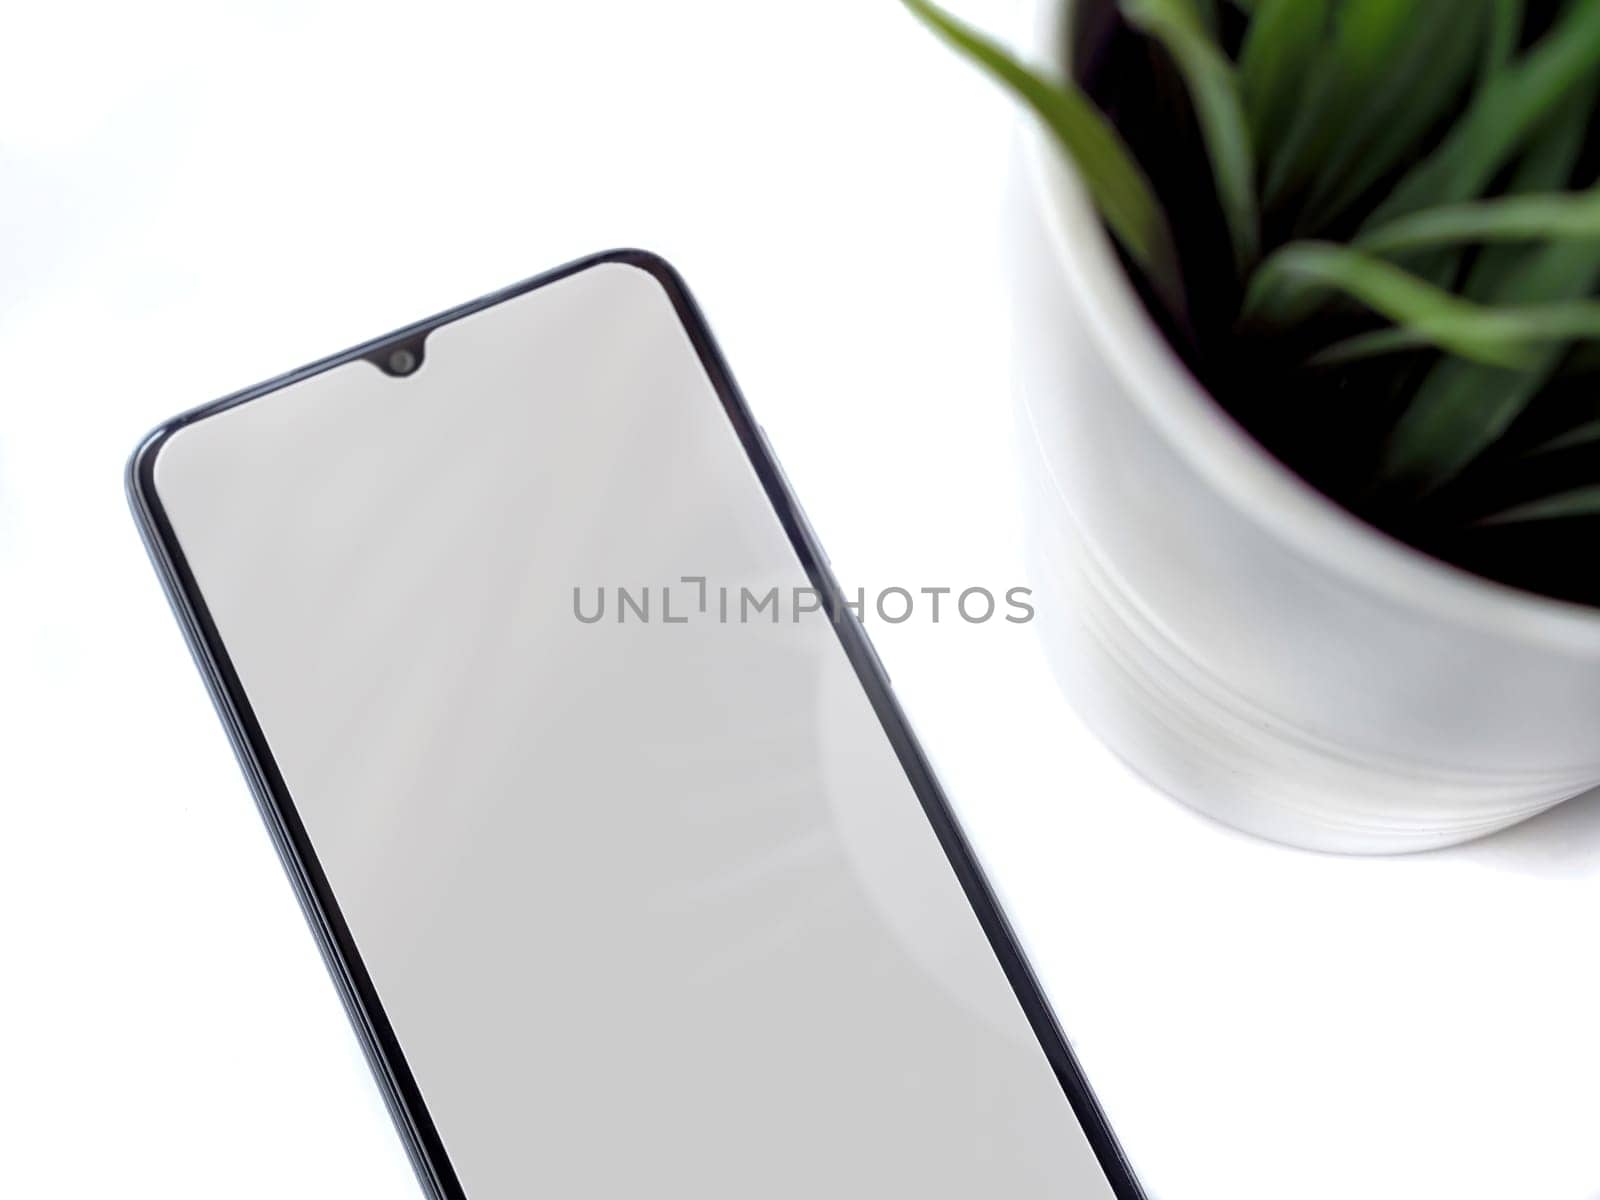 Modern minimalist workspace with black mobile smartphone mockup lies on the surface with a blank screen. Office desk table with a green plant. Top view flat lay closeup on white background.